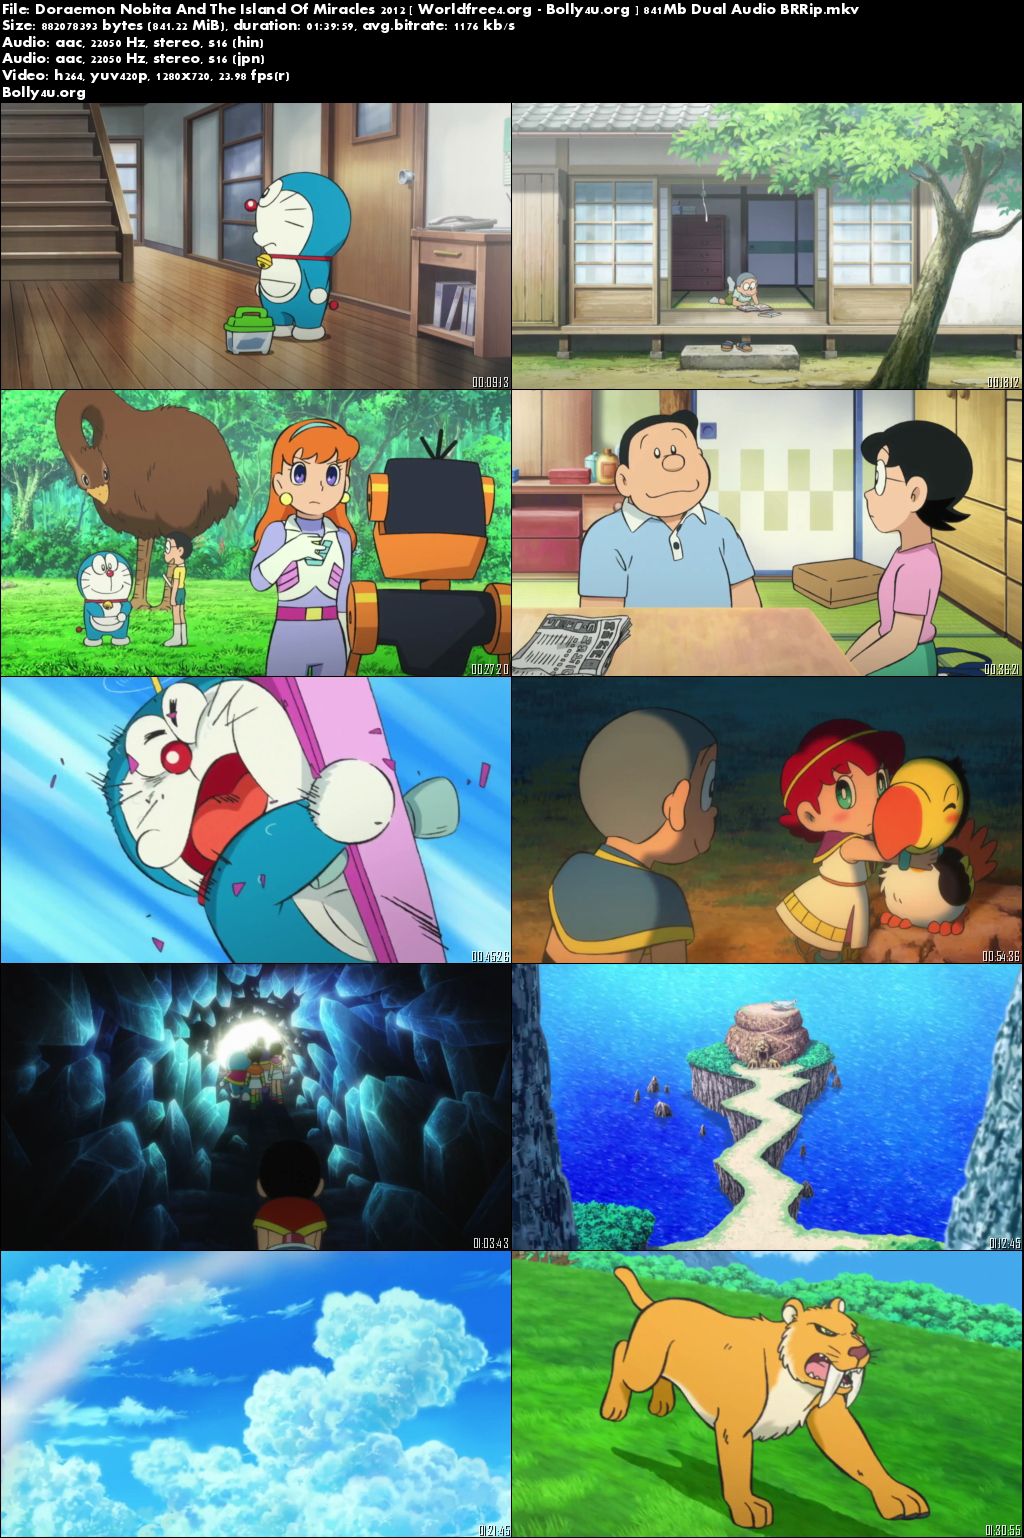 Doraemon Nobita And The Island Of Miracles 2012 Dual Audio 850mb Download